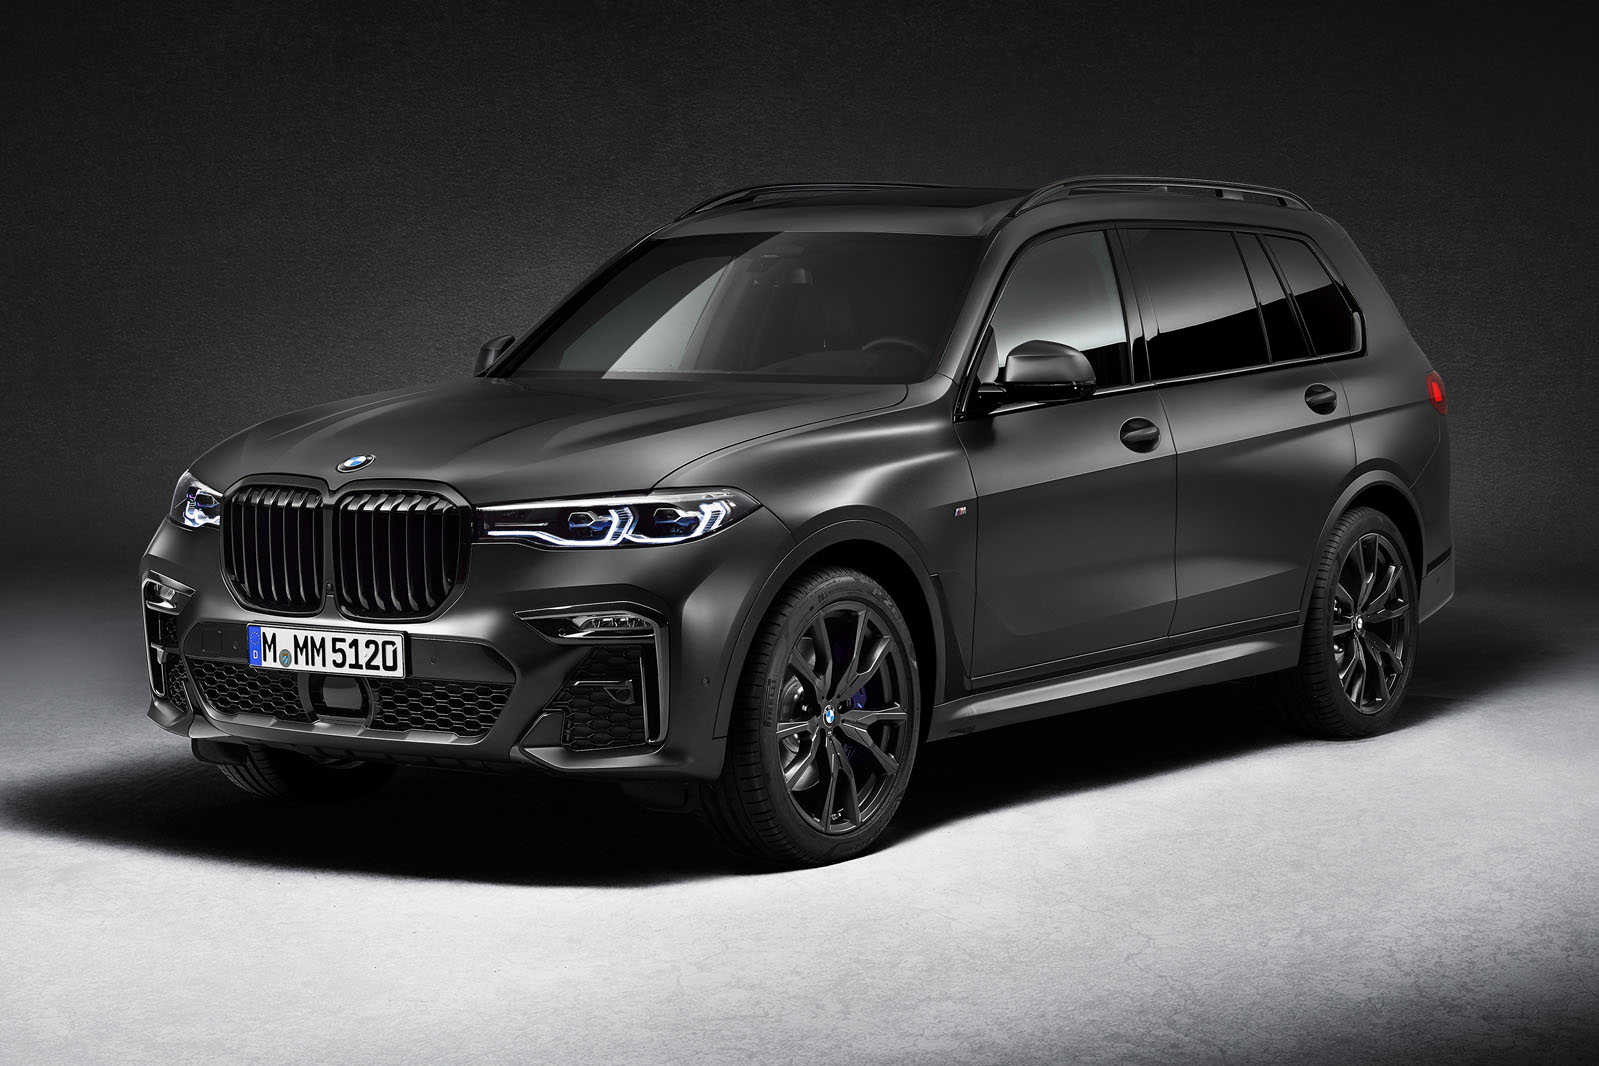 New BMW X7 Dark Shadow edition is ultra-exclusive special